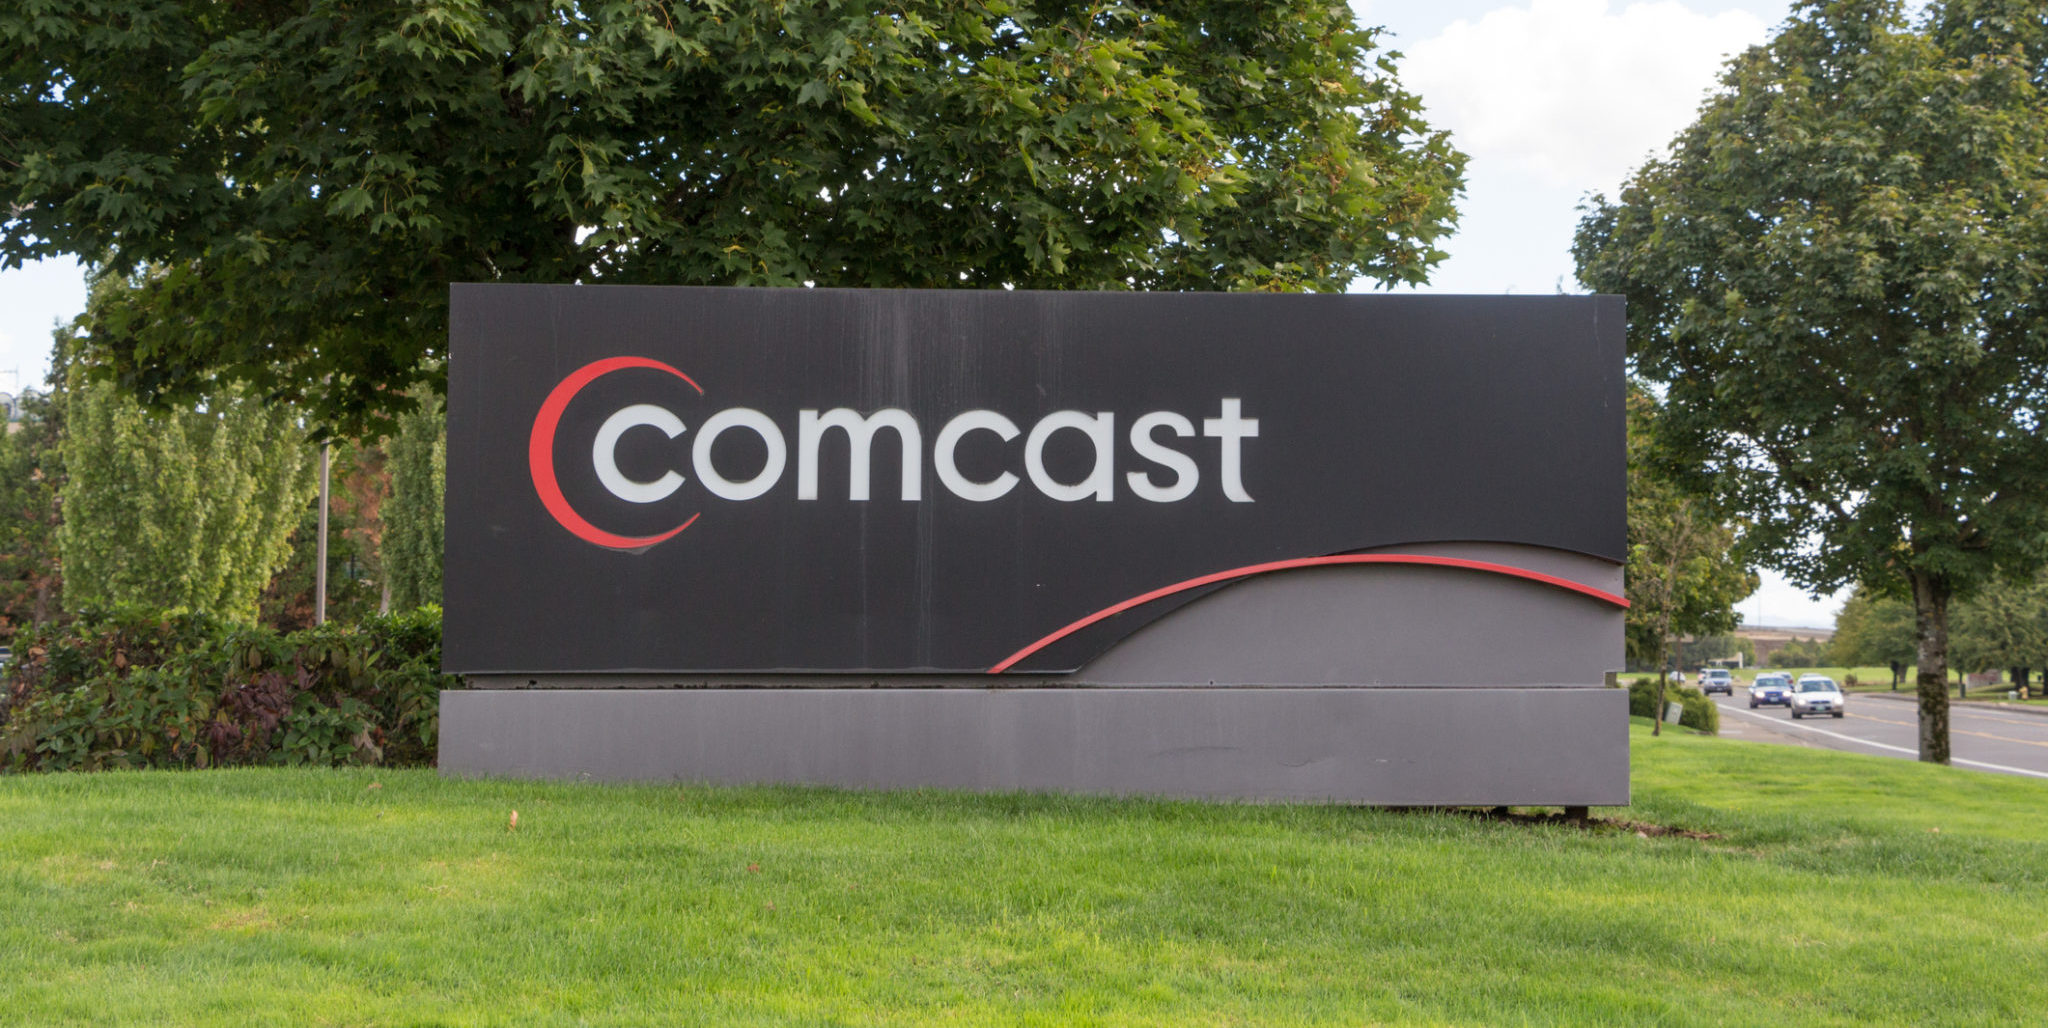 Comcast & Viacom Ramp-up Their Anti-Piracy Fight By Joining ACE